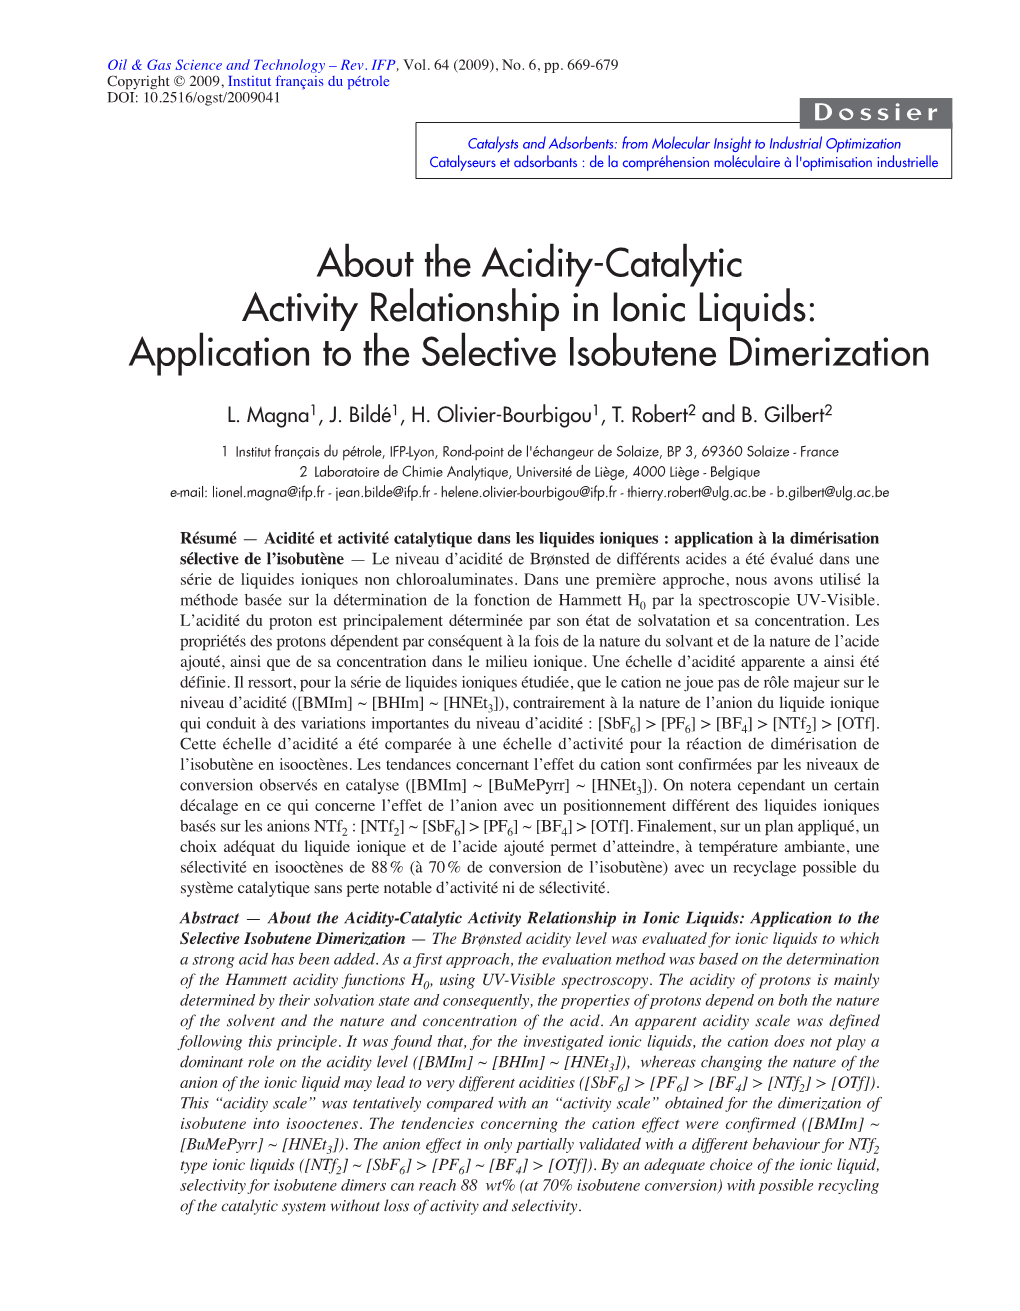 About the Acidity-Catalytic Activity Relationship in Ionic Liquids: Application to the Selective Isobutene Dimerization